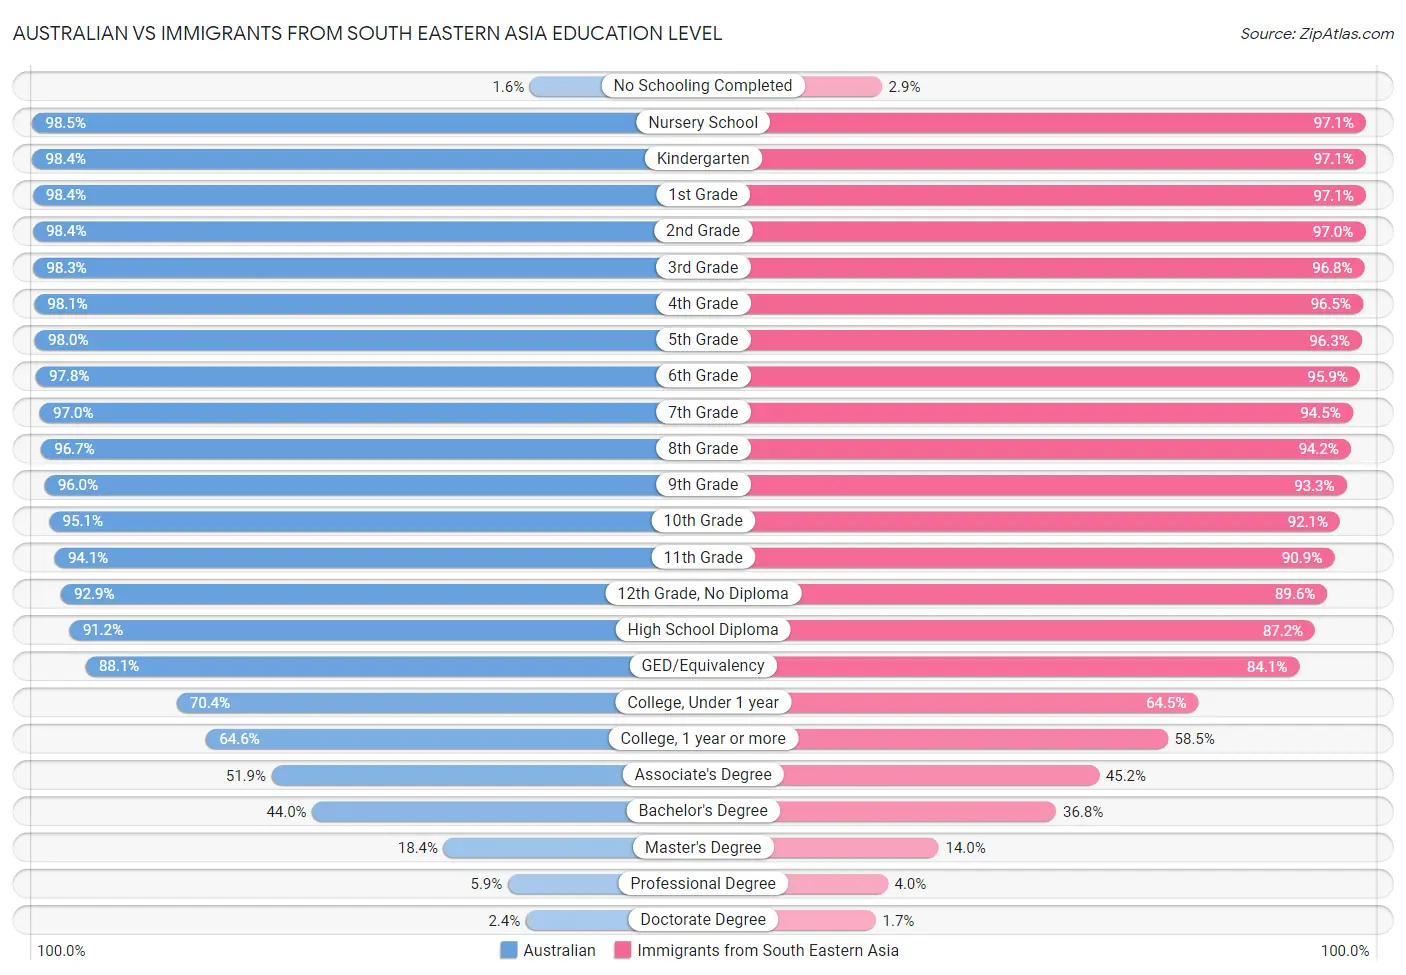 Australian vs Immigrants from South Eastern Asia Education Level